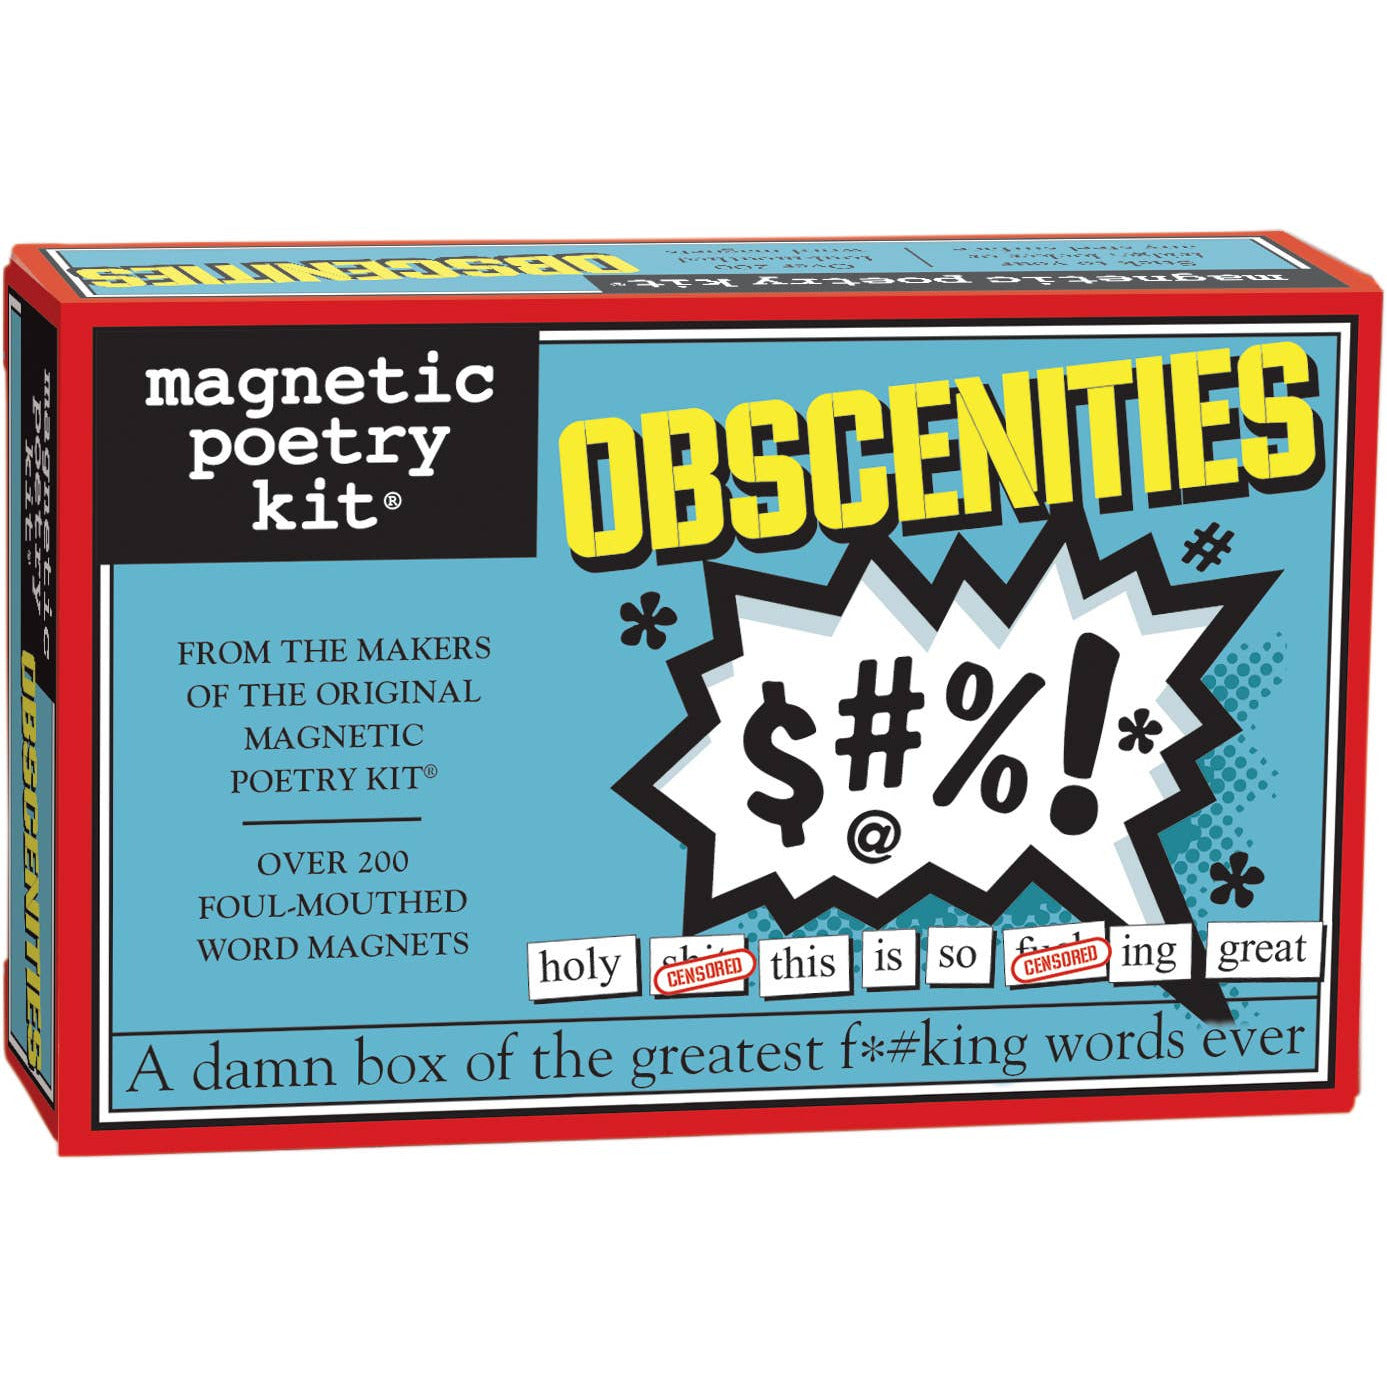 Magnetic Poetry Word Magnets Pack - Obscenities